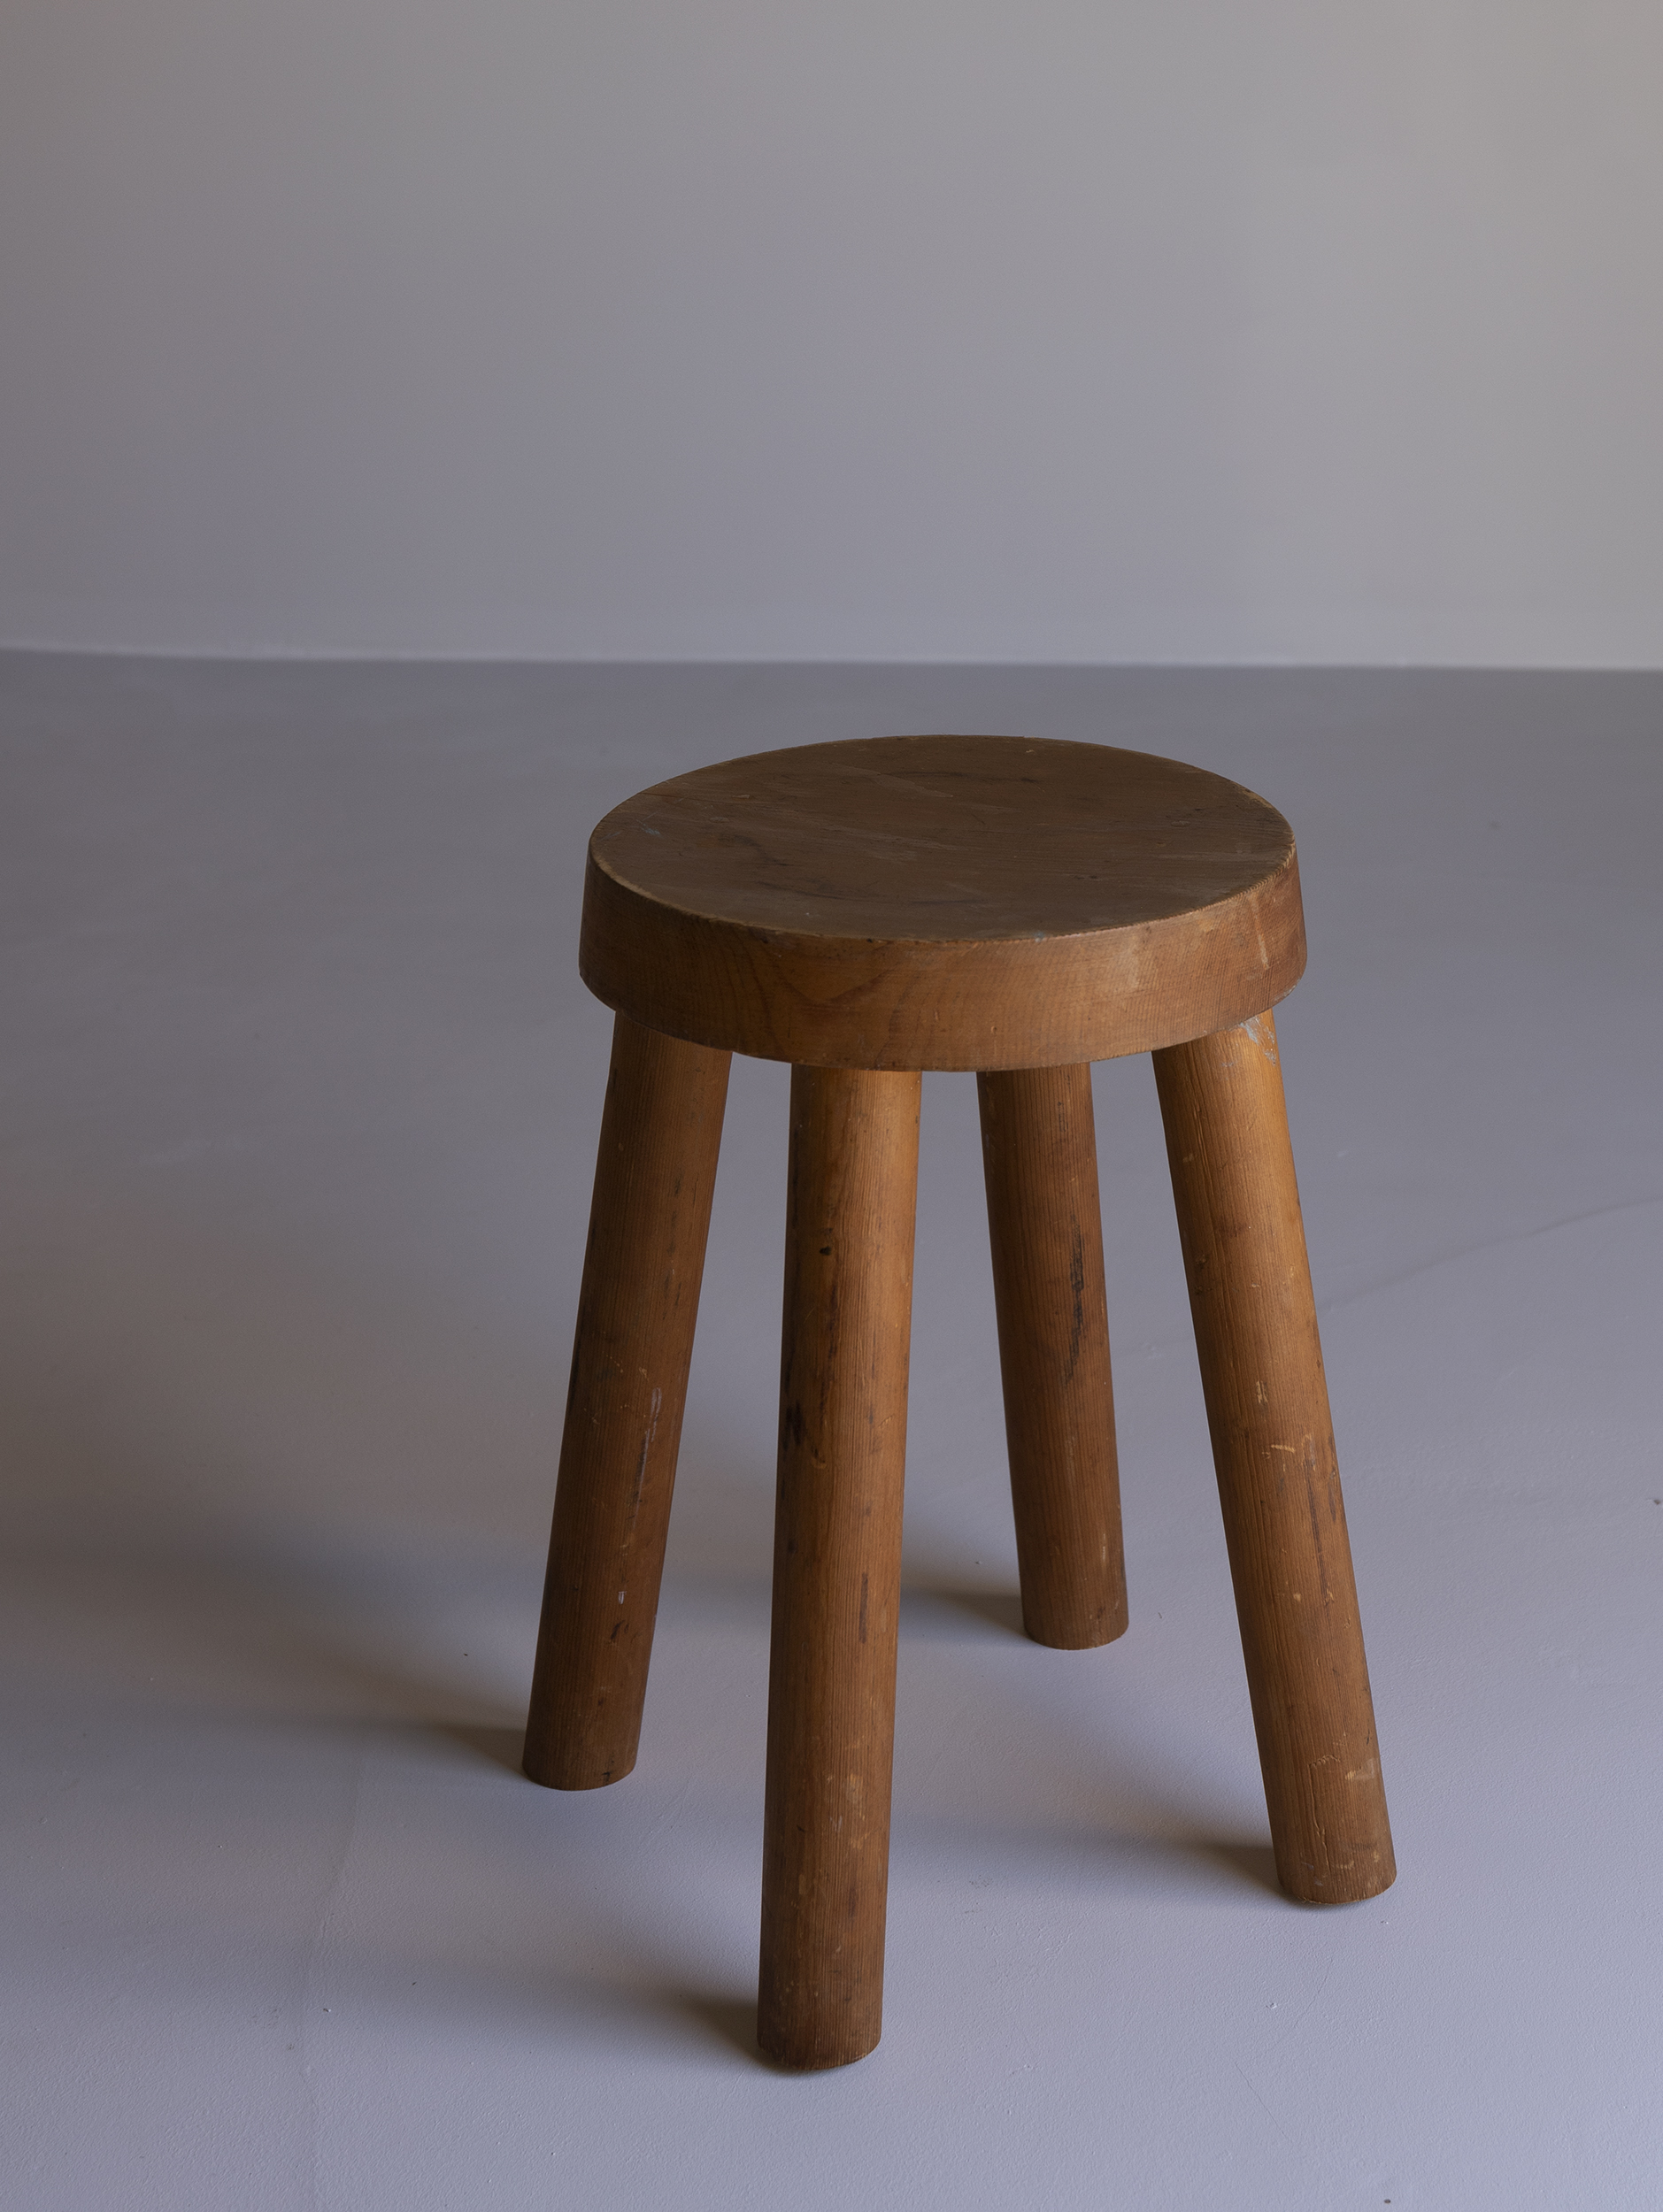 Wood stool for Méribel ski resort by Charlotte Perriand